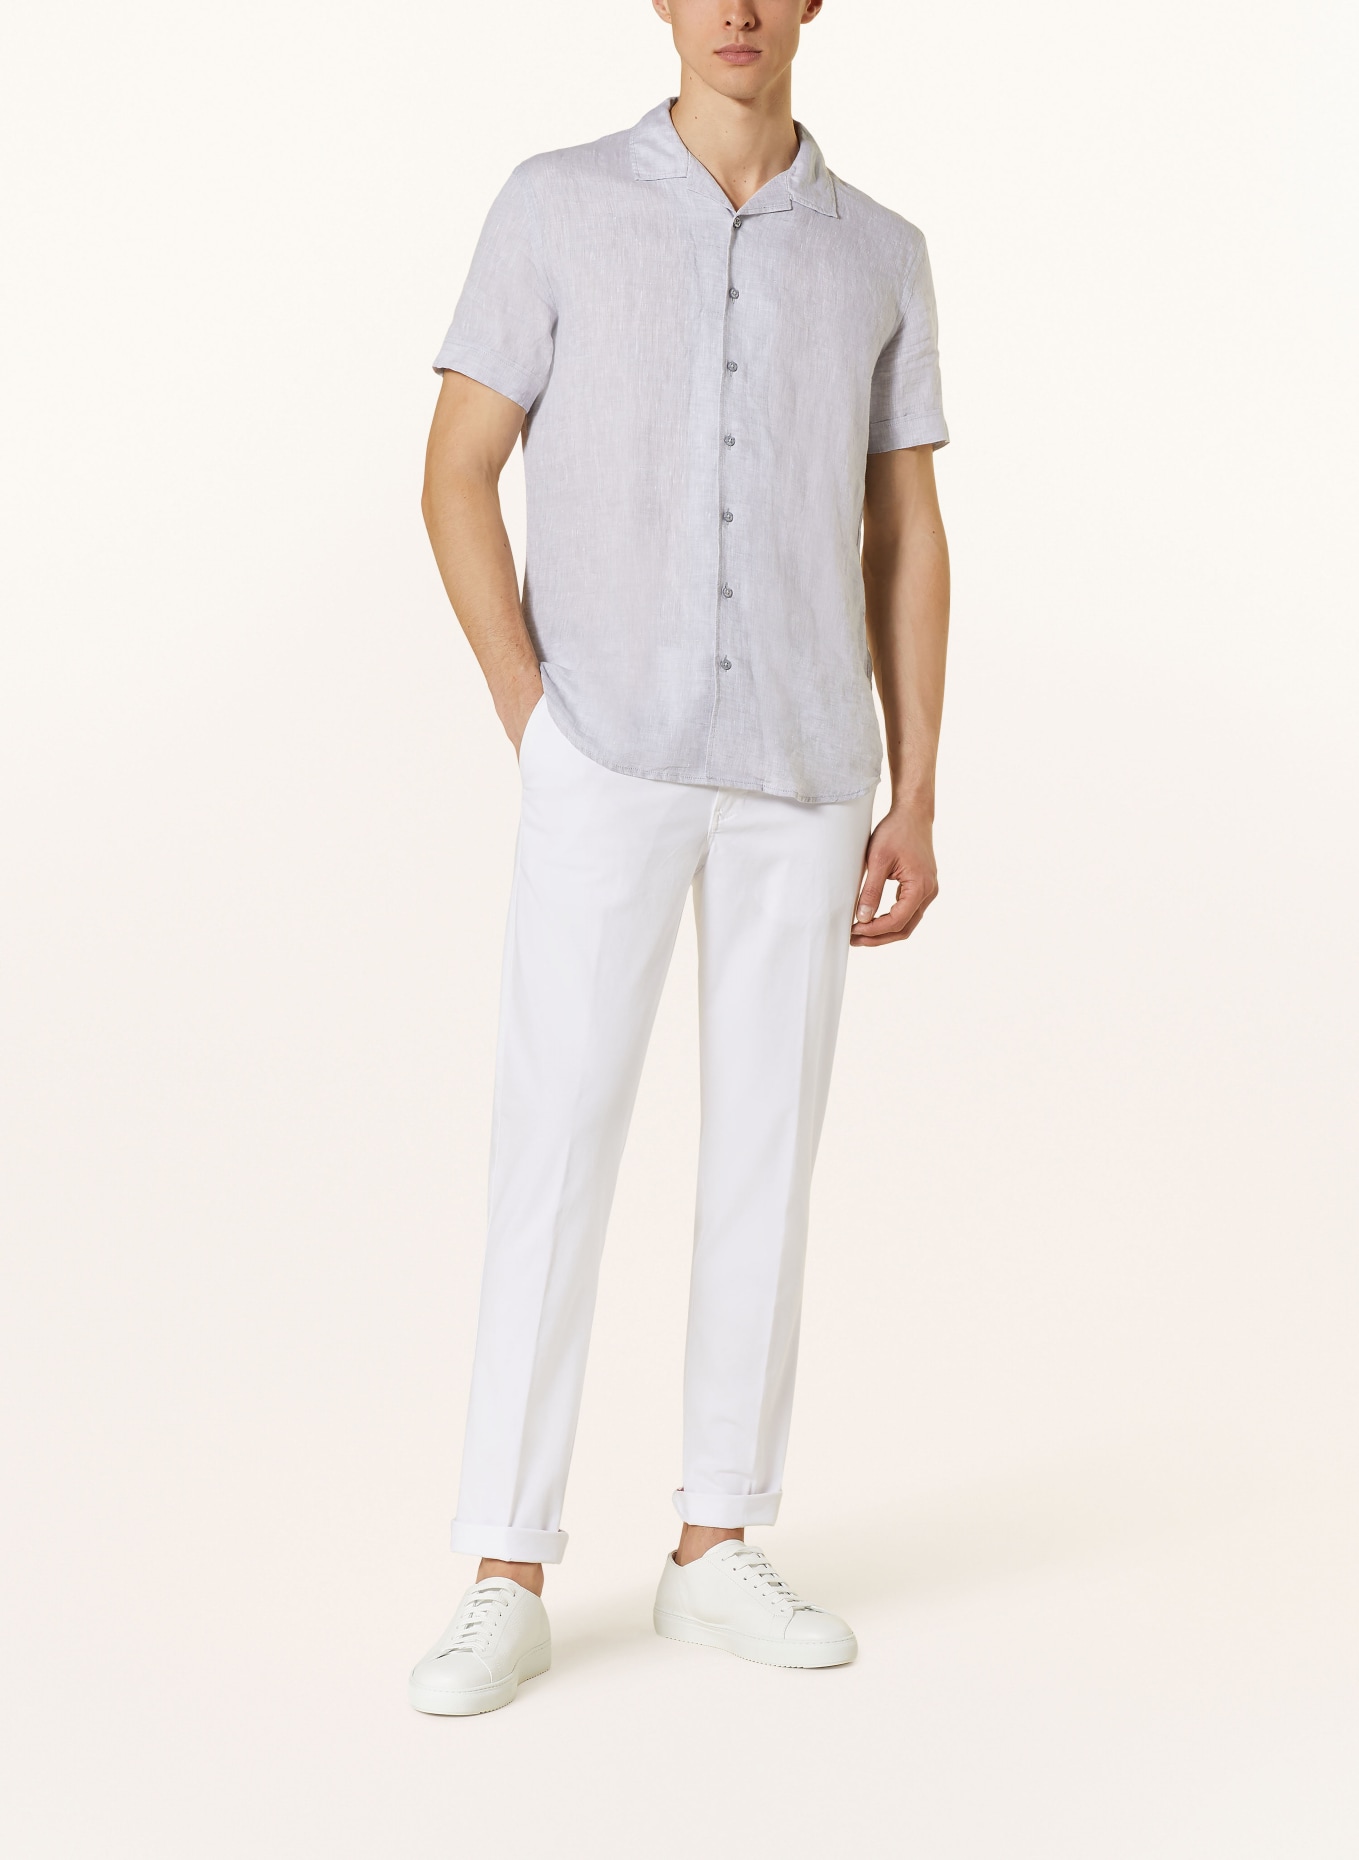 Q1 Manufaktur Resort shirt OLLY slim relaxed fit in linen, Color: GRAY (Image 2)